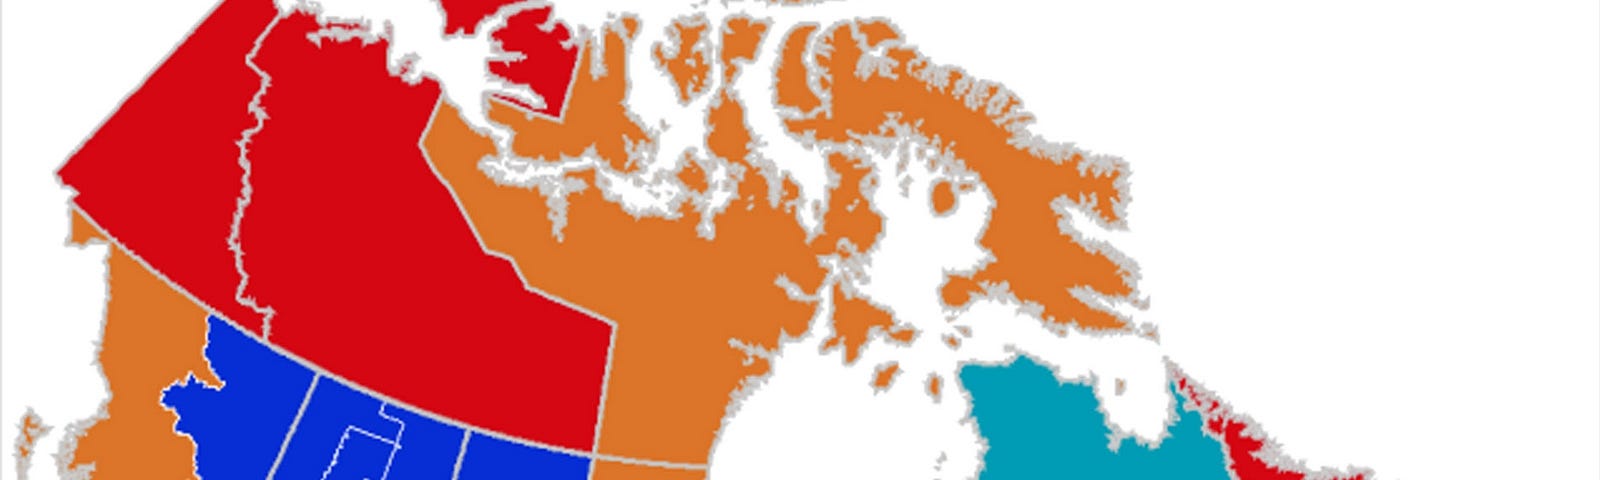 Canadian 2019 federal election map coded by winning parties